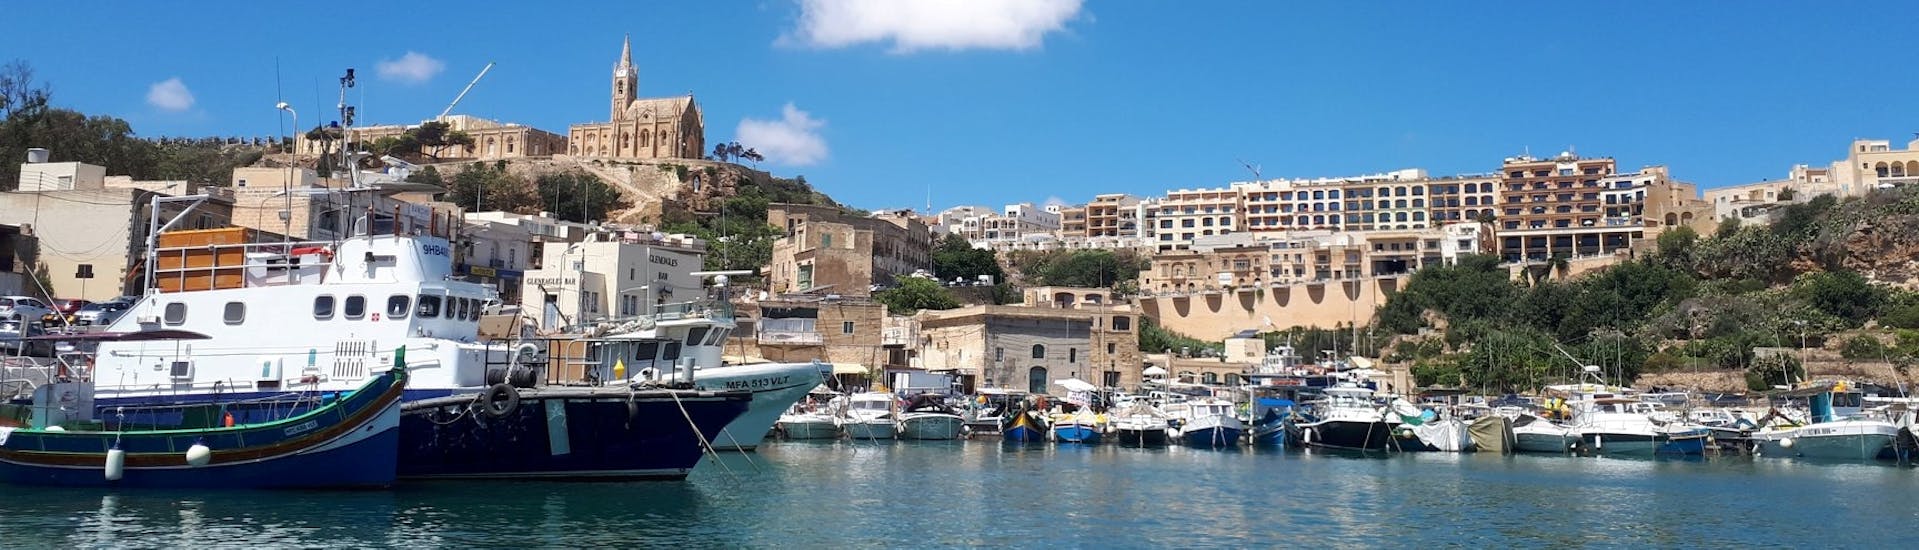 The beautiful harbor of Gozo photographed by boat during the Speedboat Trip to Blue Lagoon & Sightseeing Bus Tour on Gozo.